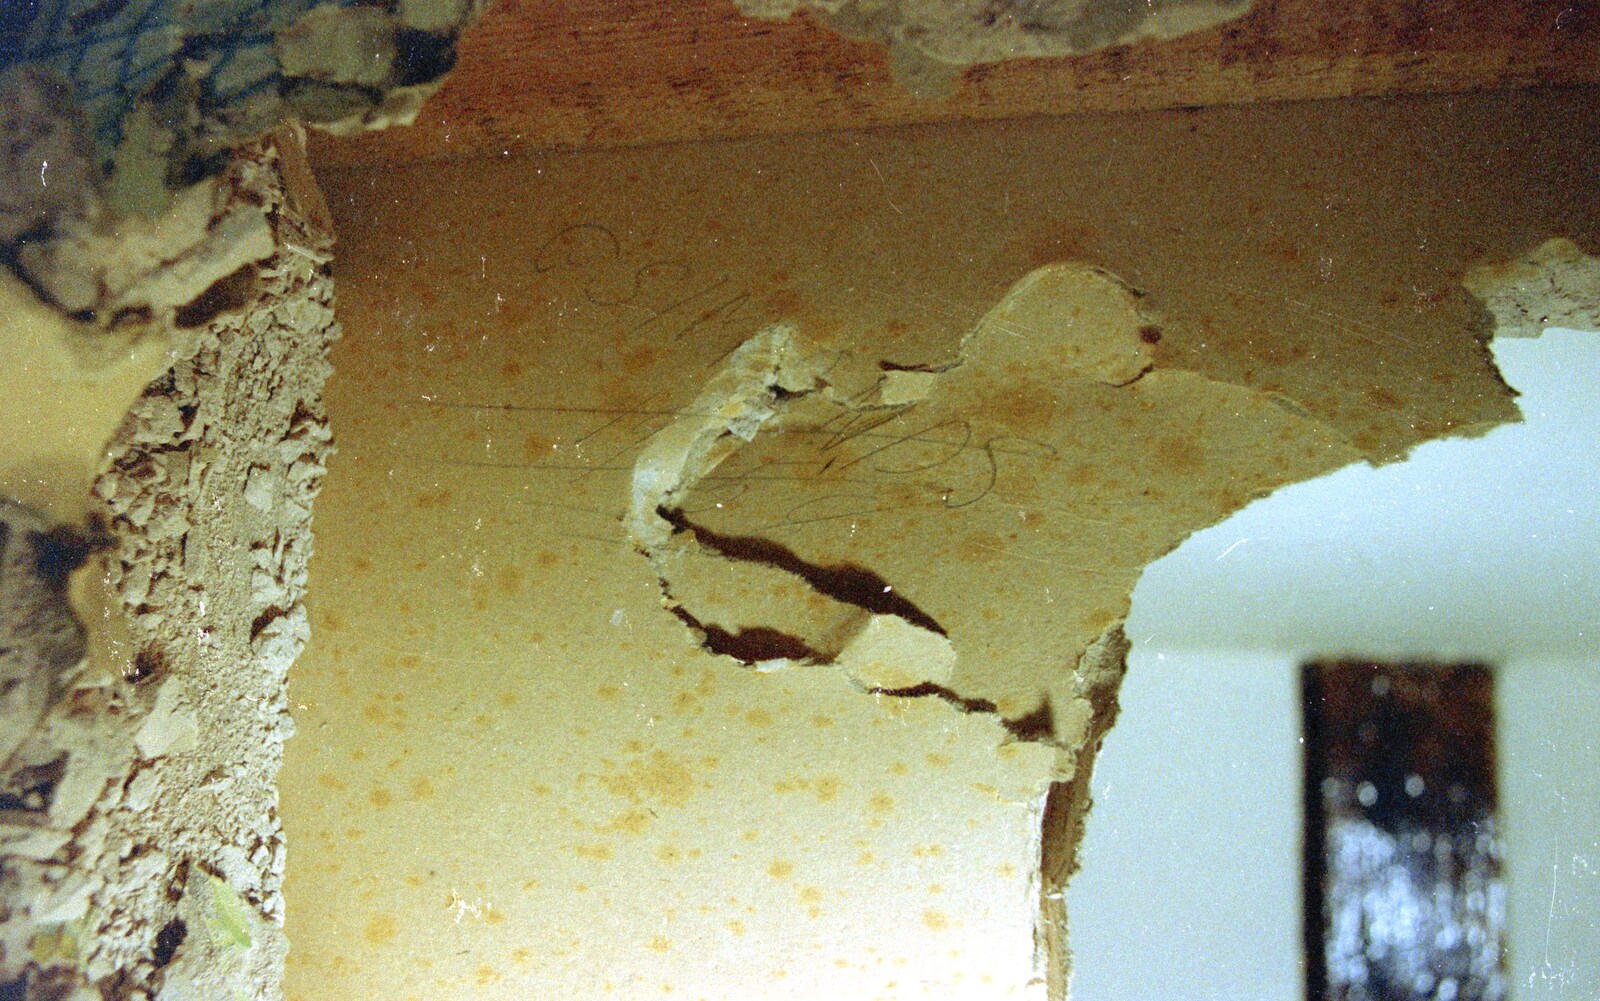 Signed board: C Simonds, 1958 from Hale-Bopp and Bedroom Demolition, Brome, Suffolk - 10th May 1997